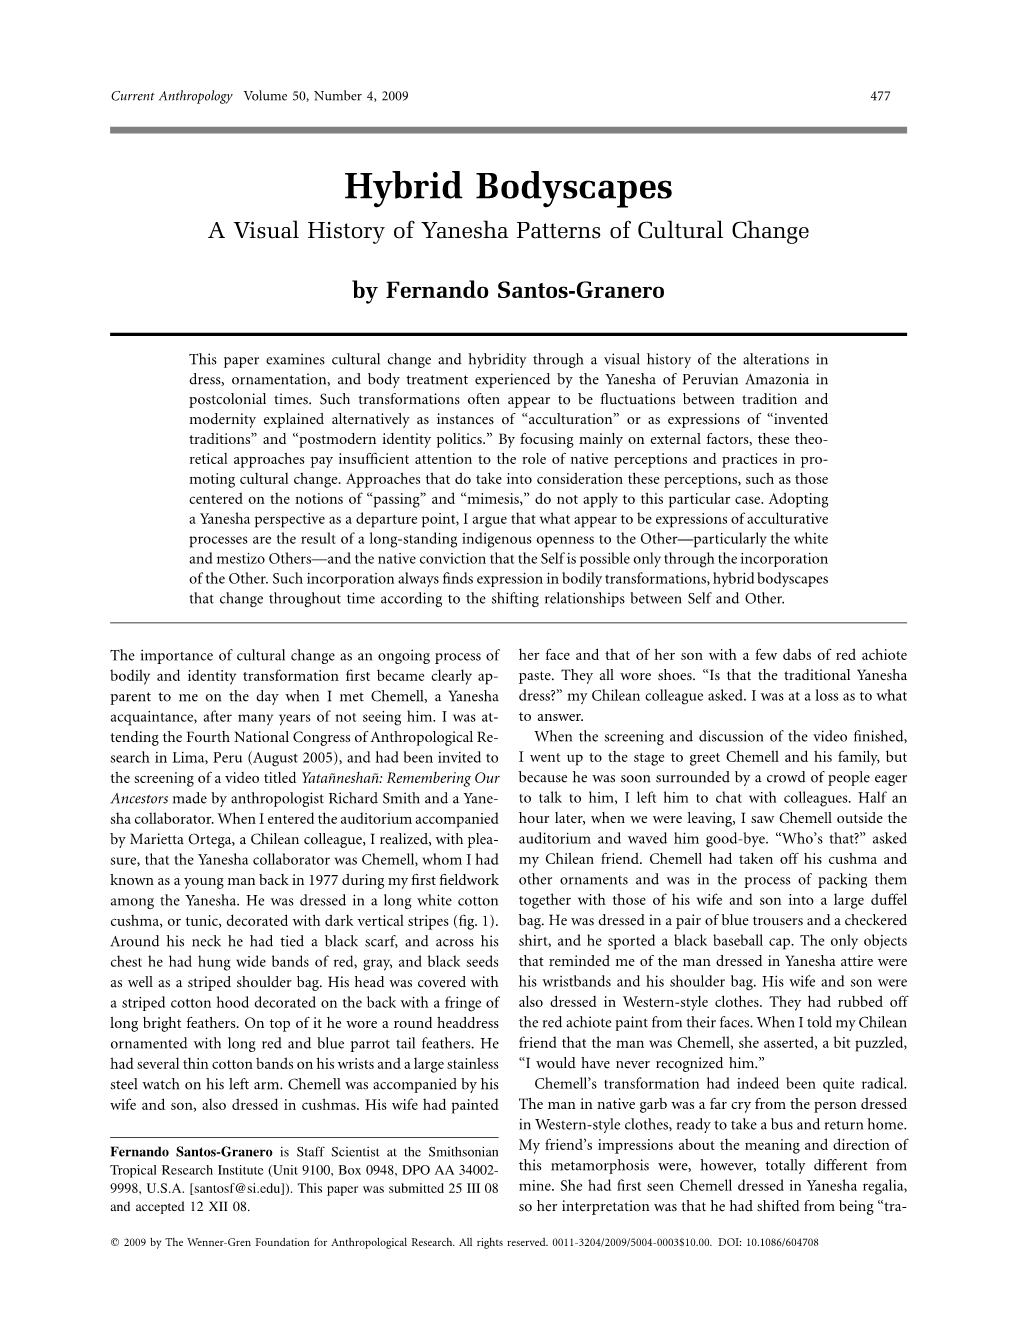 Hybrid Bodyscapes a Visual History of Yanesha Patterns of Cultural Change